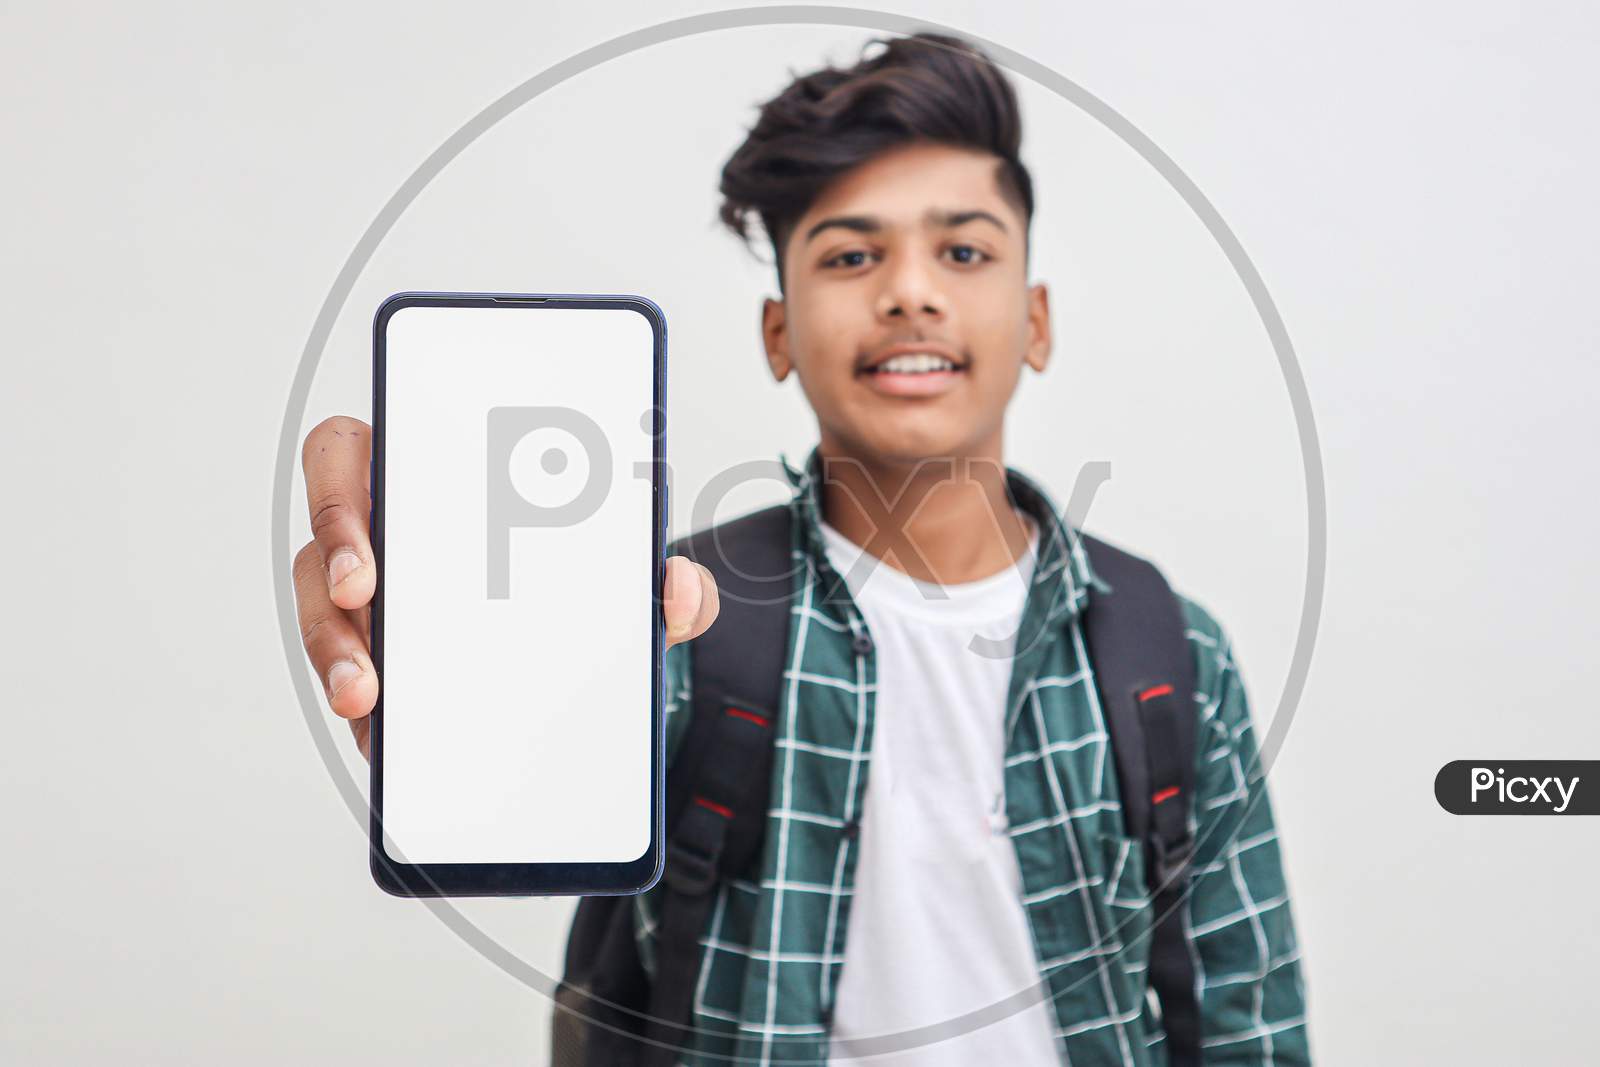 Young Indian College Student Showing Smartphone Screen On White Background.